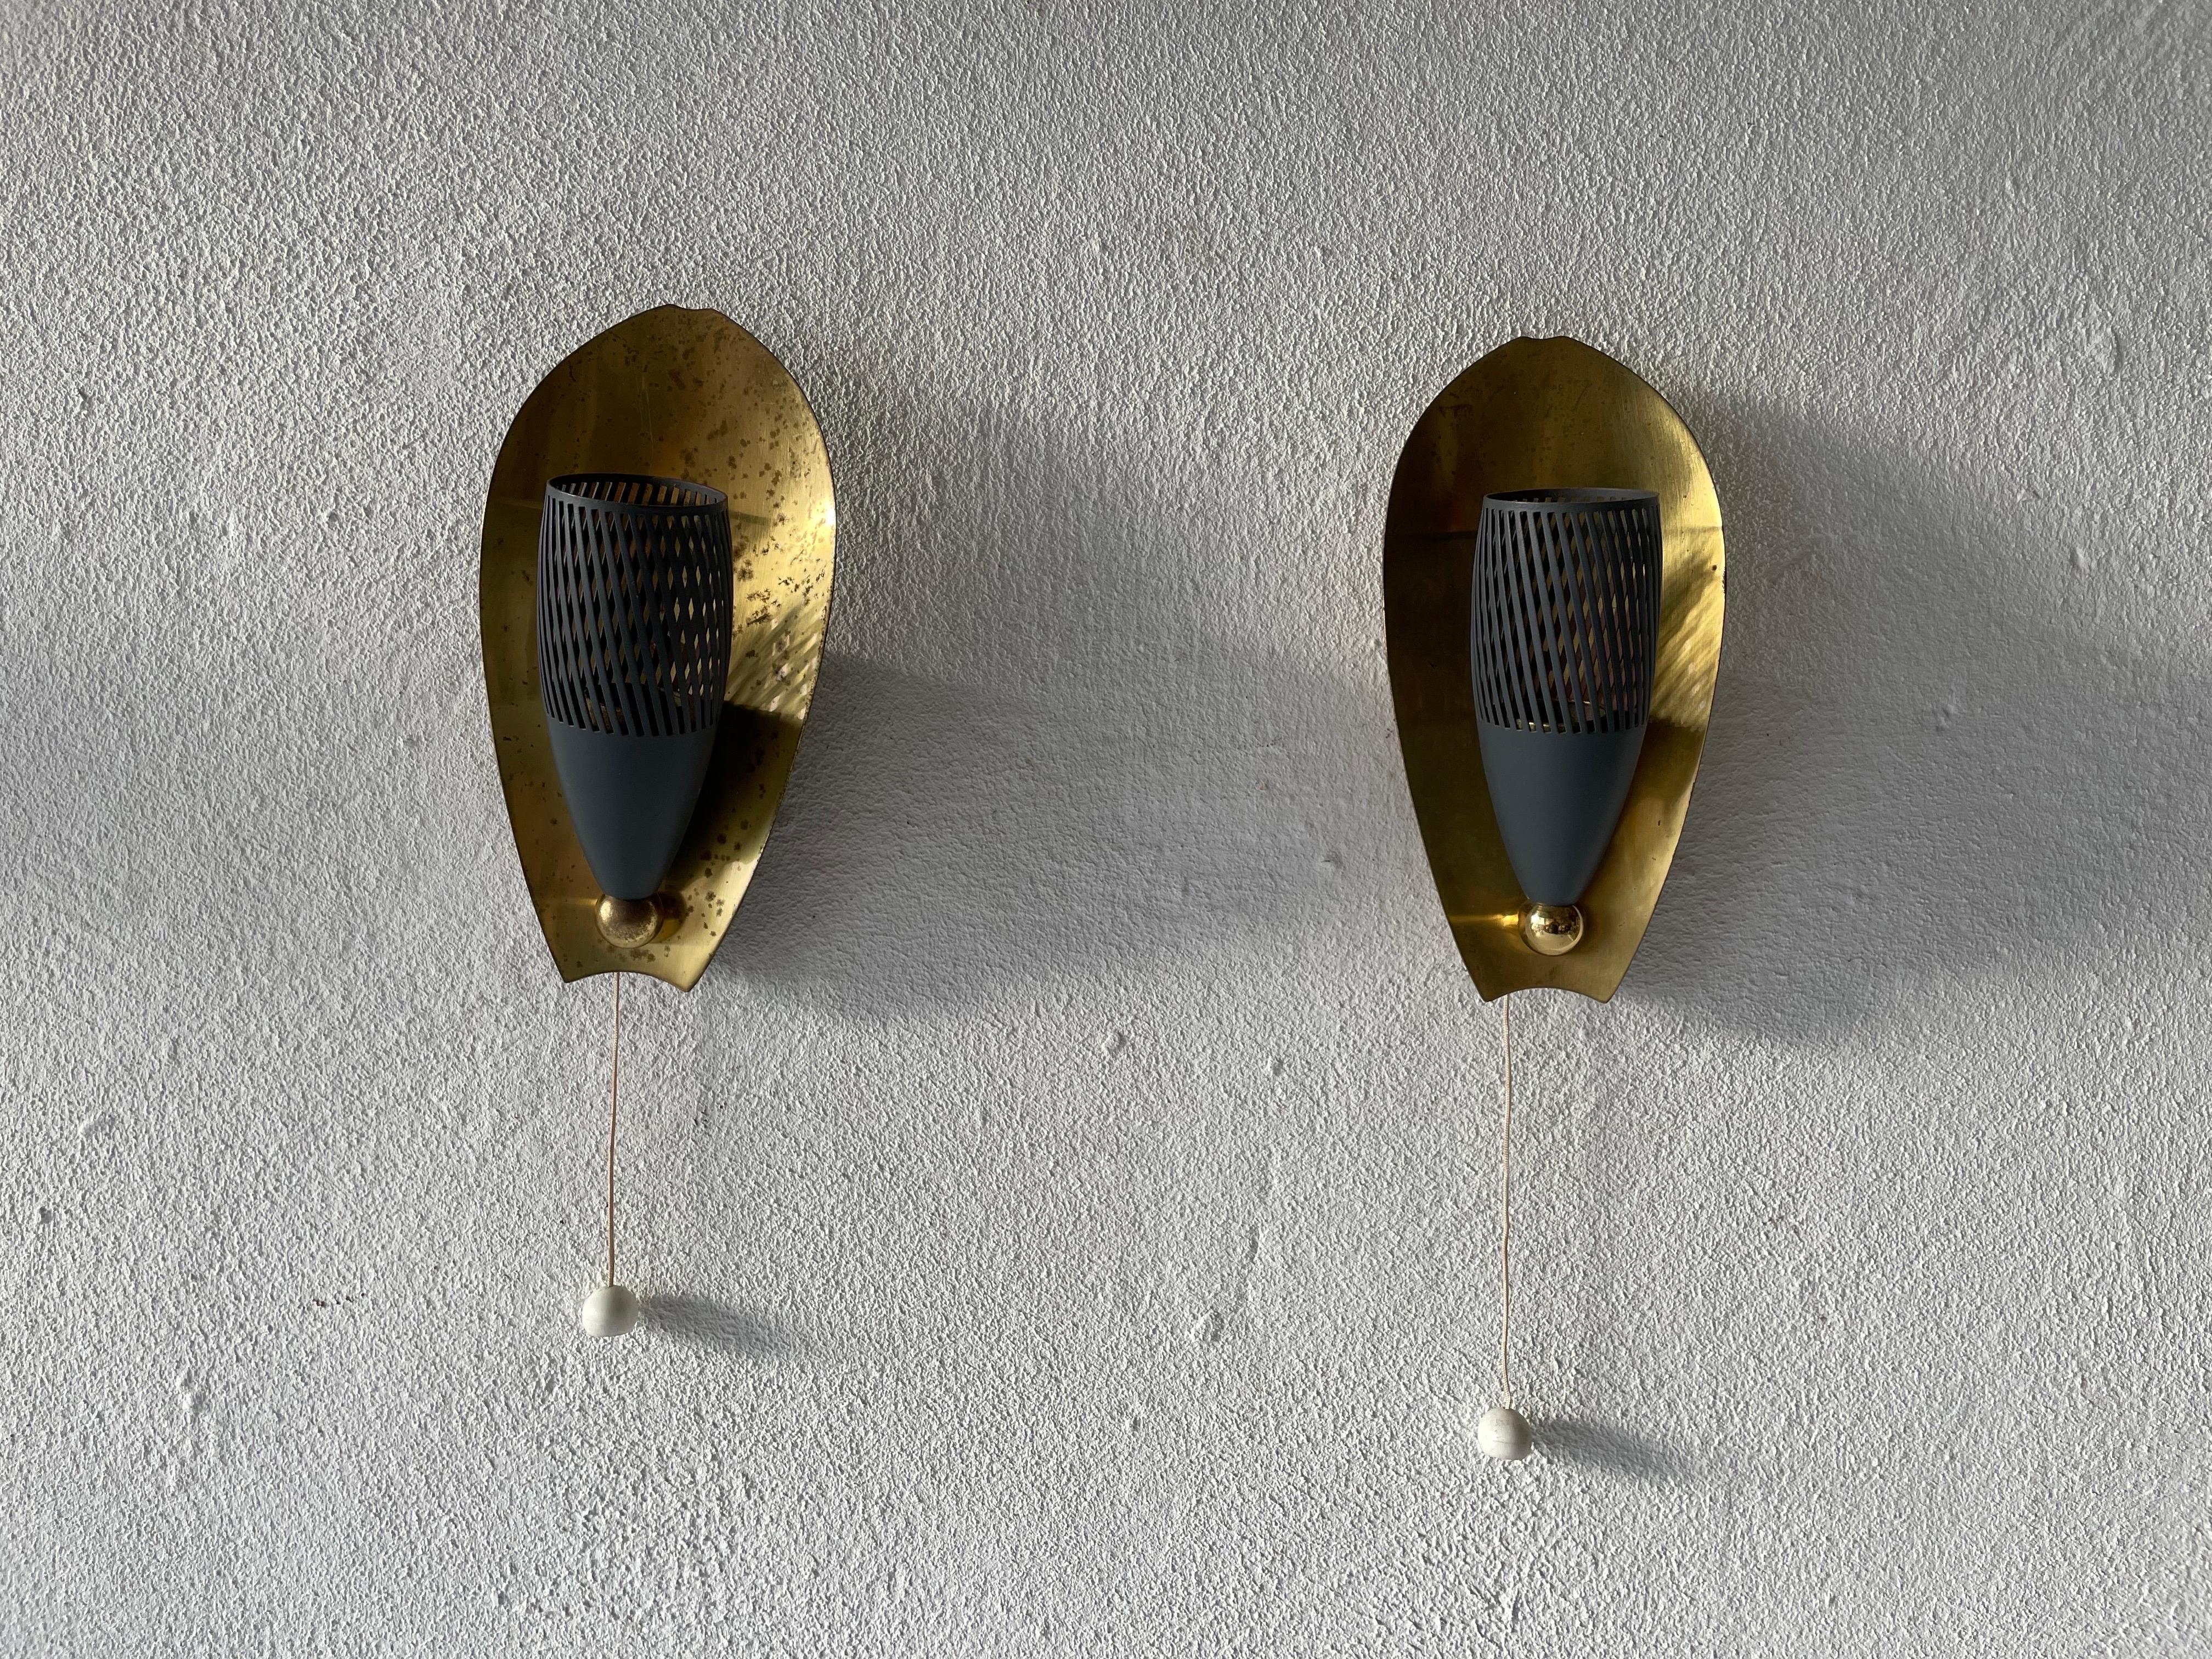 Mid-Century brass and grey metal pair of sconces, 1950s, Germany

Very elegant and Minimalist wall lamps
Lamp is in very good condition.

These lamps works with E14 standard light bulbs. 
Wired and suitable to use in all countries. (110-220